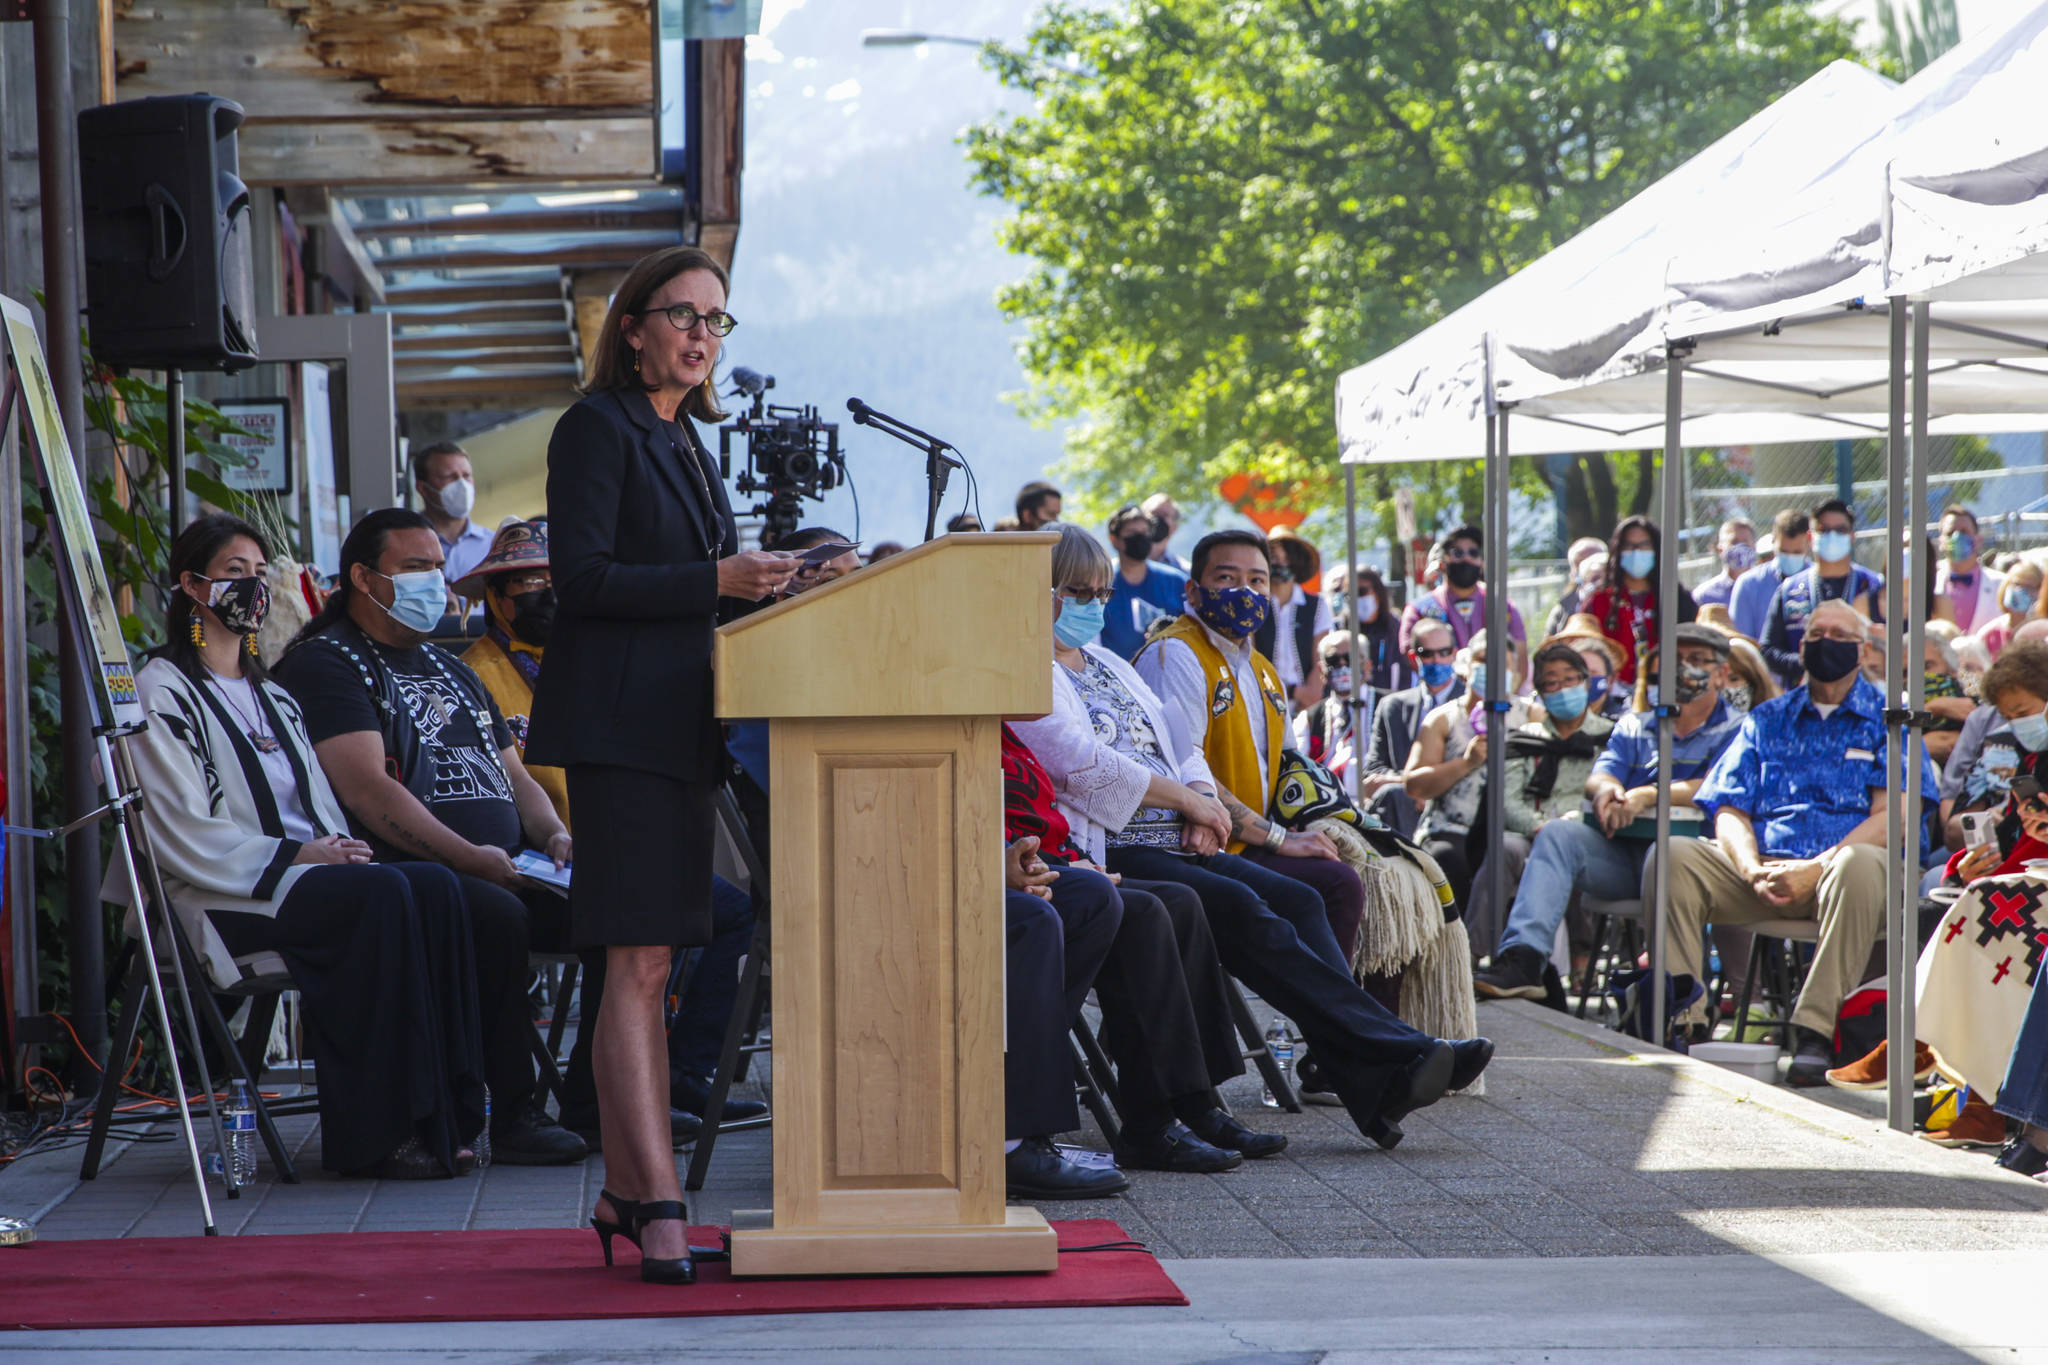 Michael S. Lockett / Juneau Empire 
Jakki Strako, U.S. Postal Service’s chief commerce and business solutions officer and executive vice president, addresses the crowd during the official ceremony for the release of the Raven Story stamp in front of the Sealaska Heritage Institute’s Walter Soboleff Building on Friday, July 30, 2021.